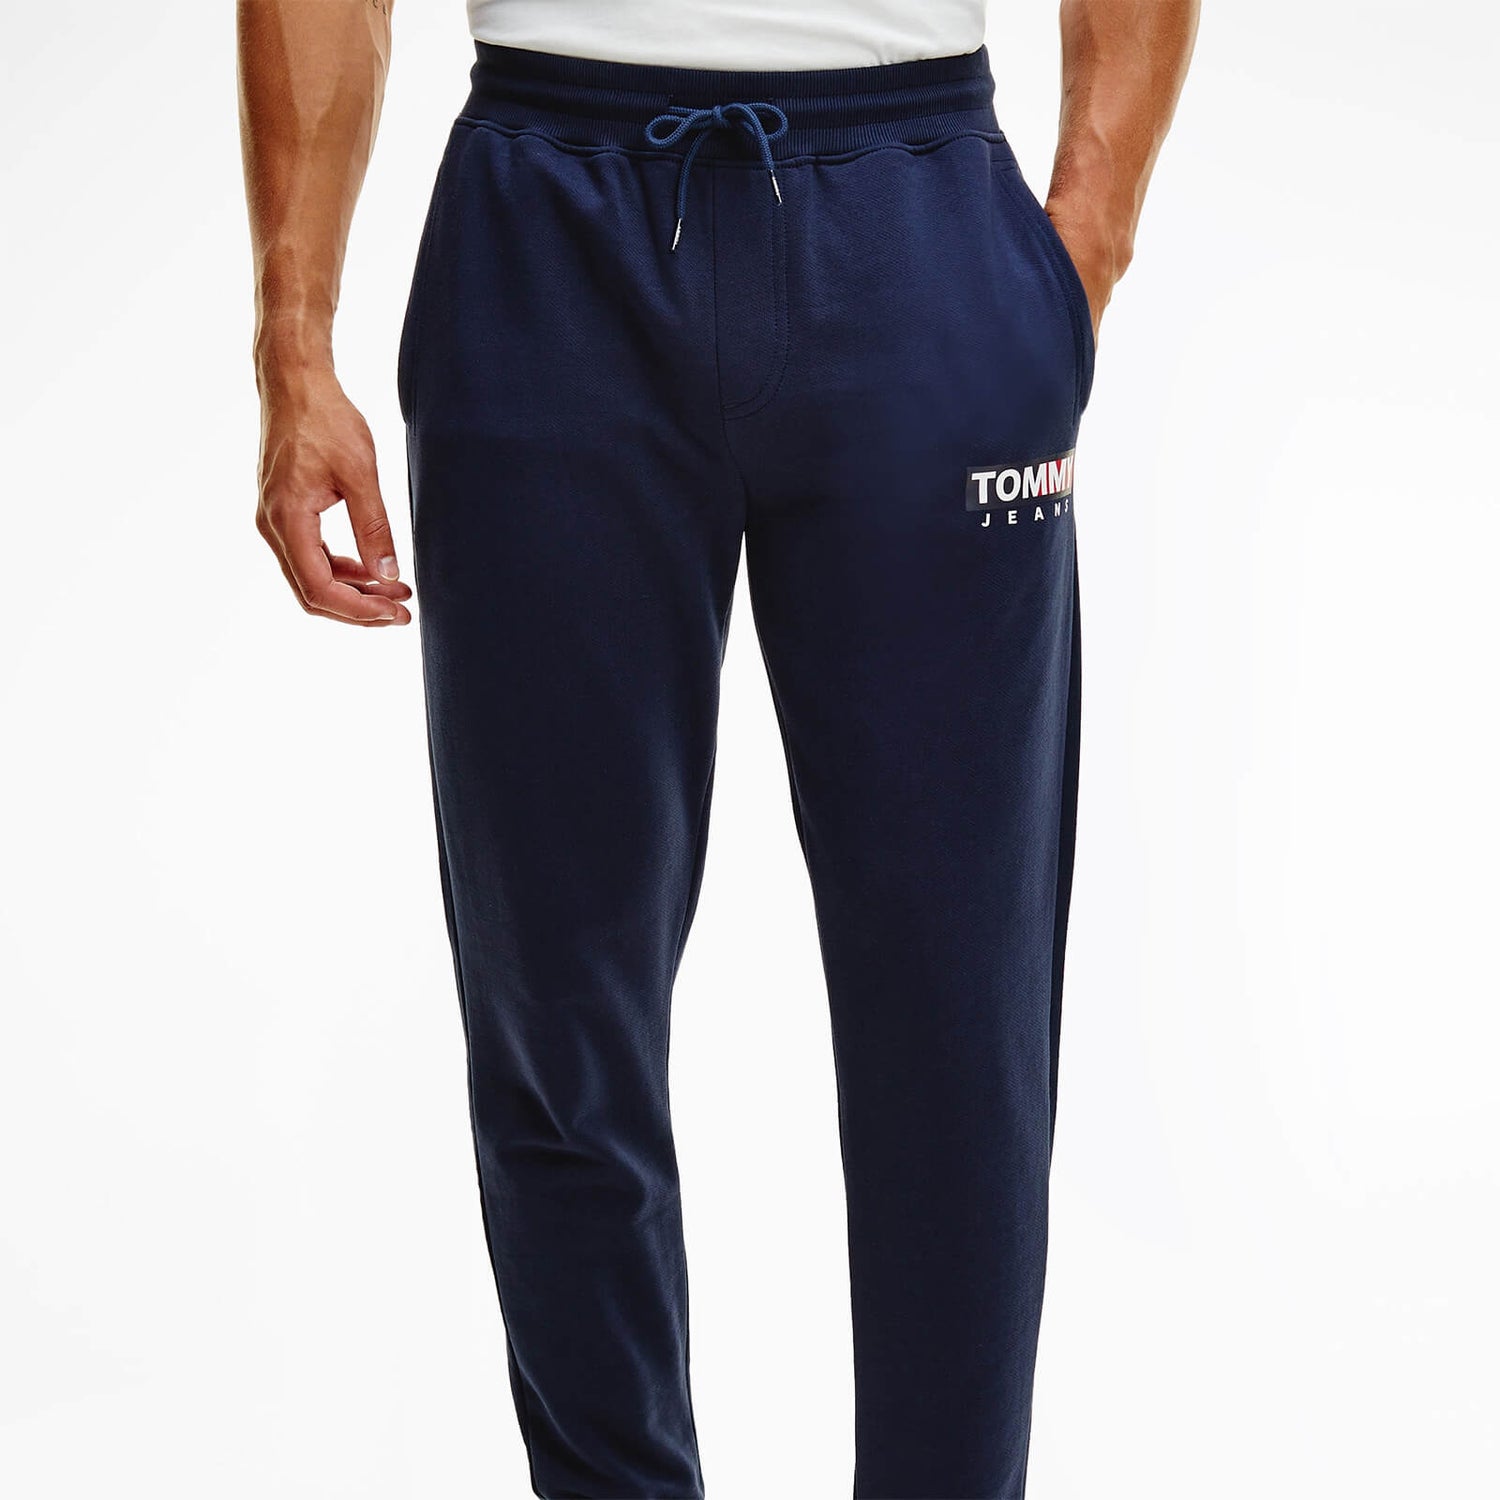 Tommy Jeans Men's Entry Graphic Sweatpants - Twilight Navy - S